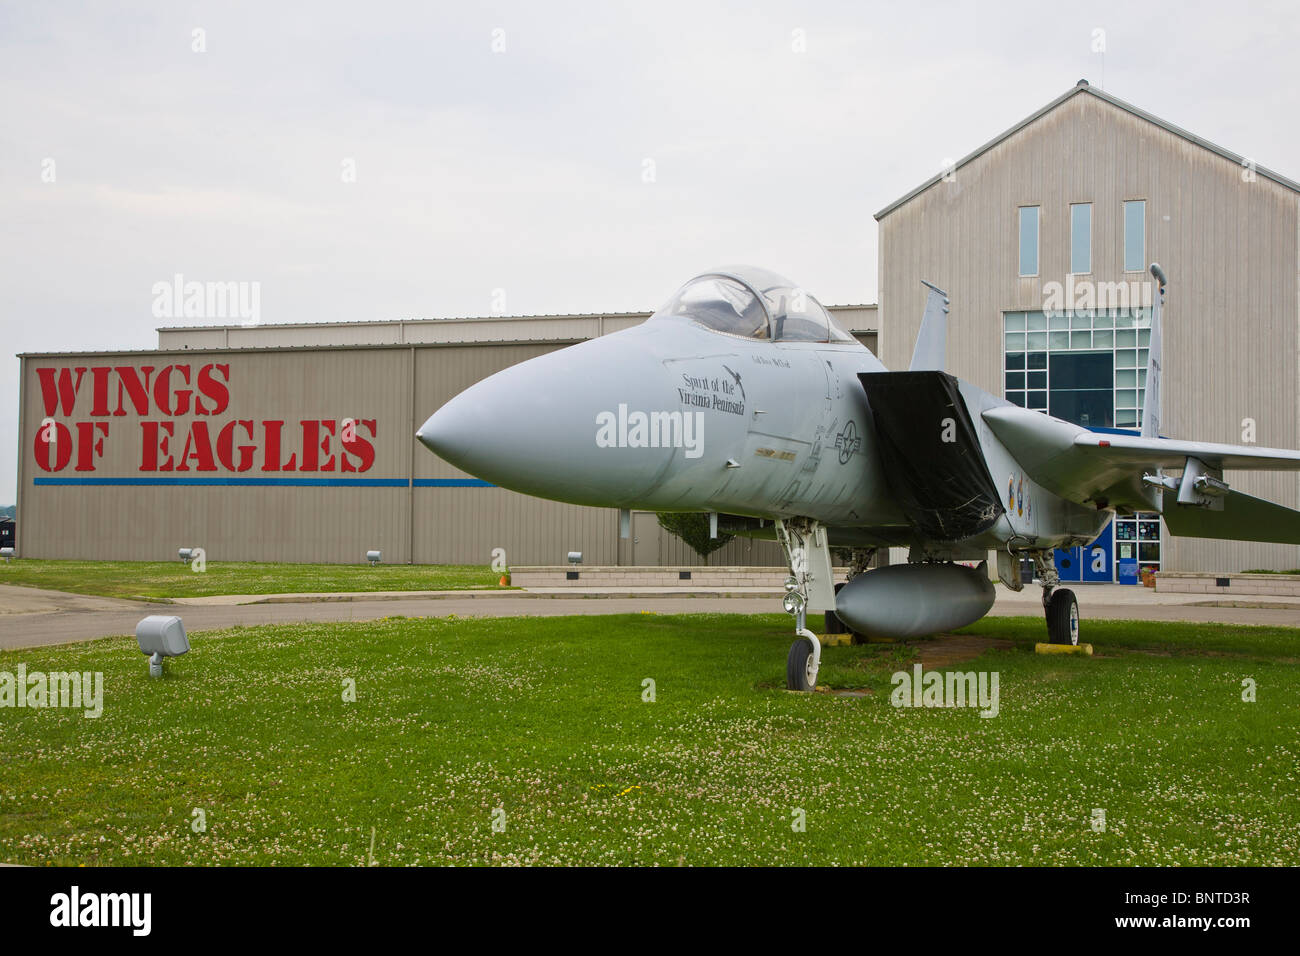 Entrance to Wings of Eagles Warplane Museum in Elmira New York Stock Photo